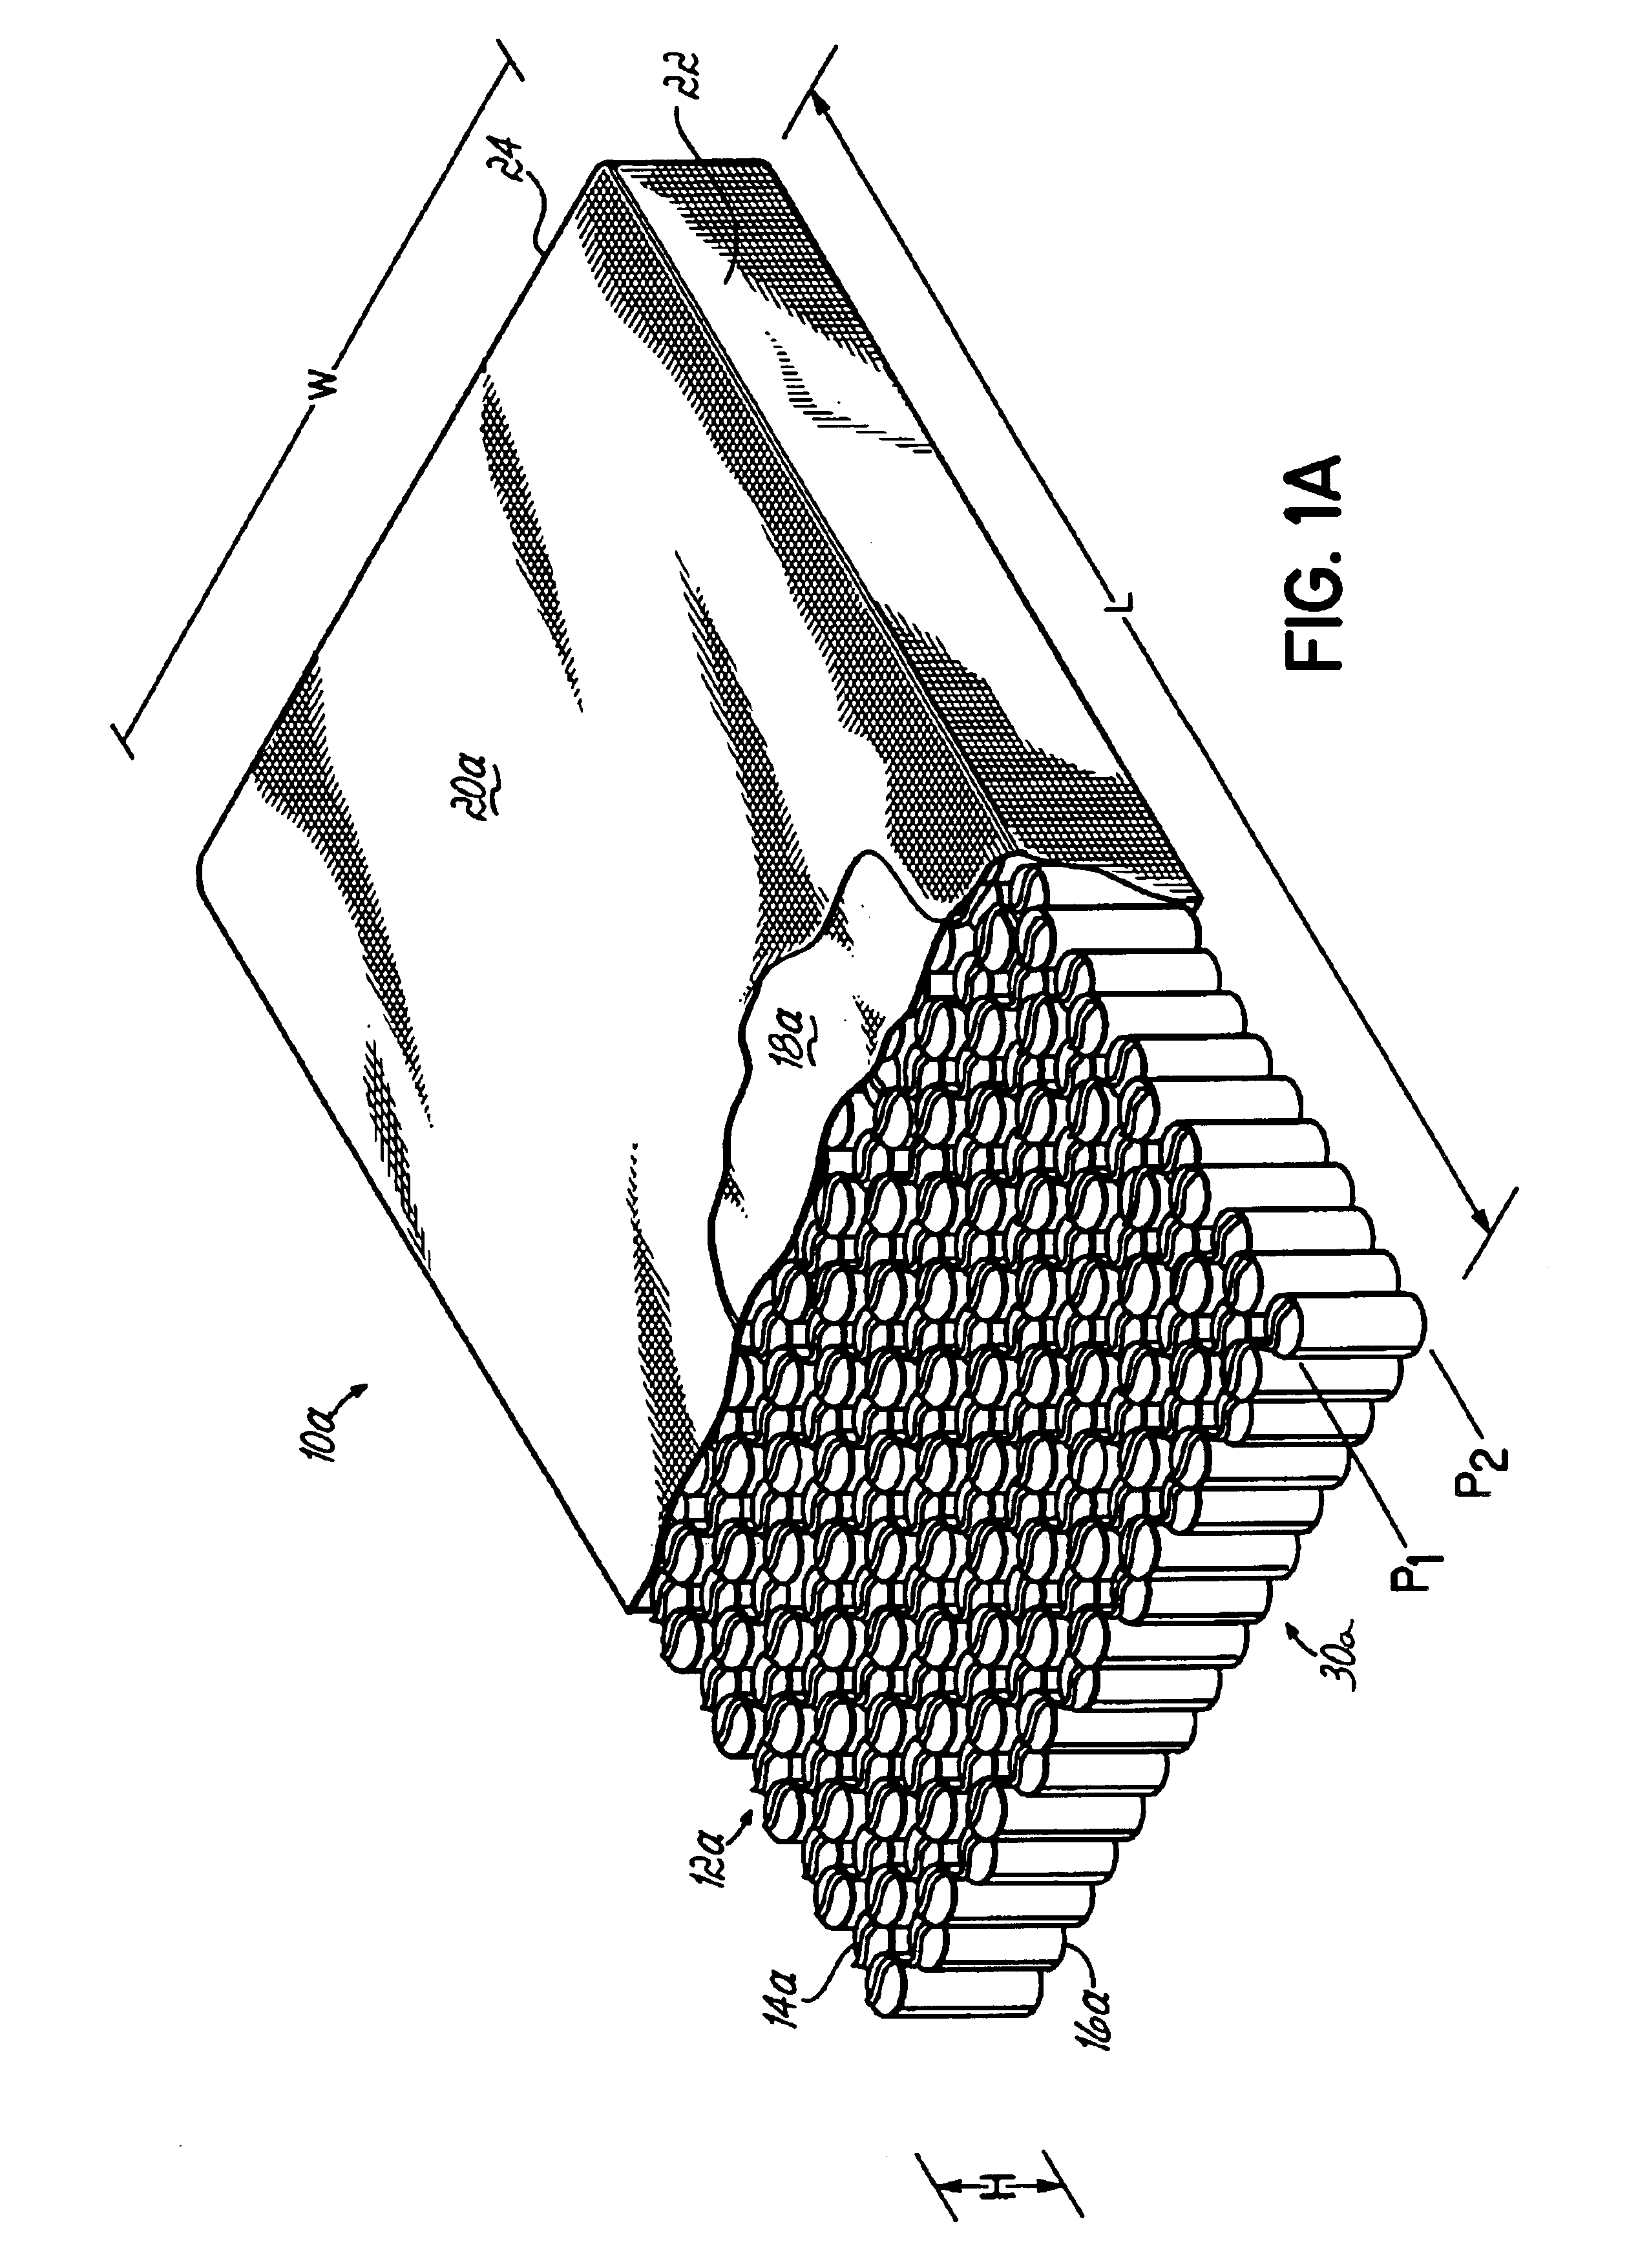 Pocketed bedding or seating product having pockets of differing heights